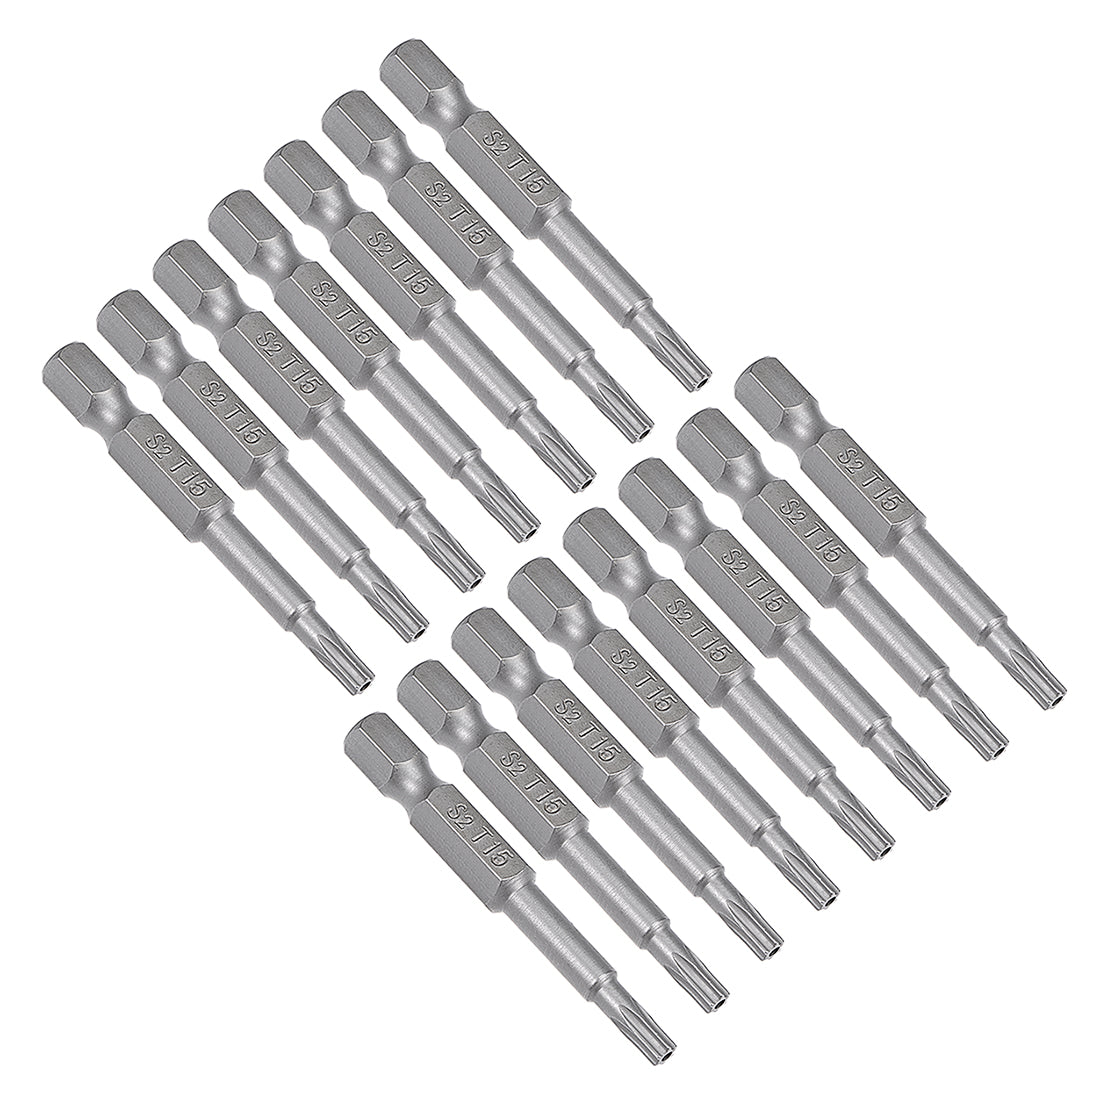 Uxcell Uxcell 15 Pcs 1/4" Hex Shank T30 Magnetic Security Torx Screwdriver Bits 50mm Length